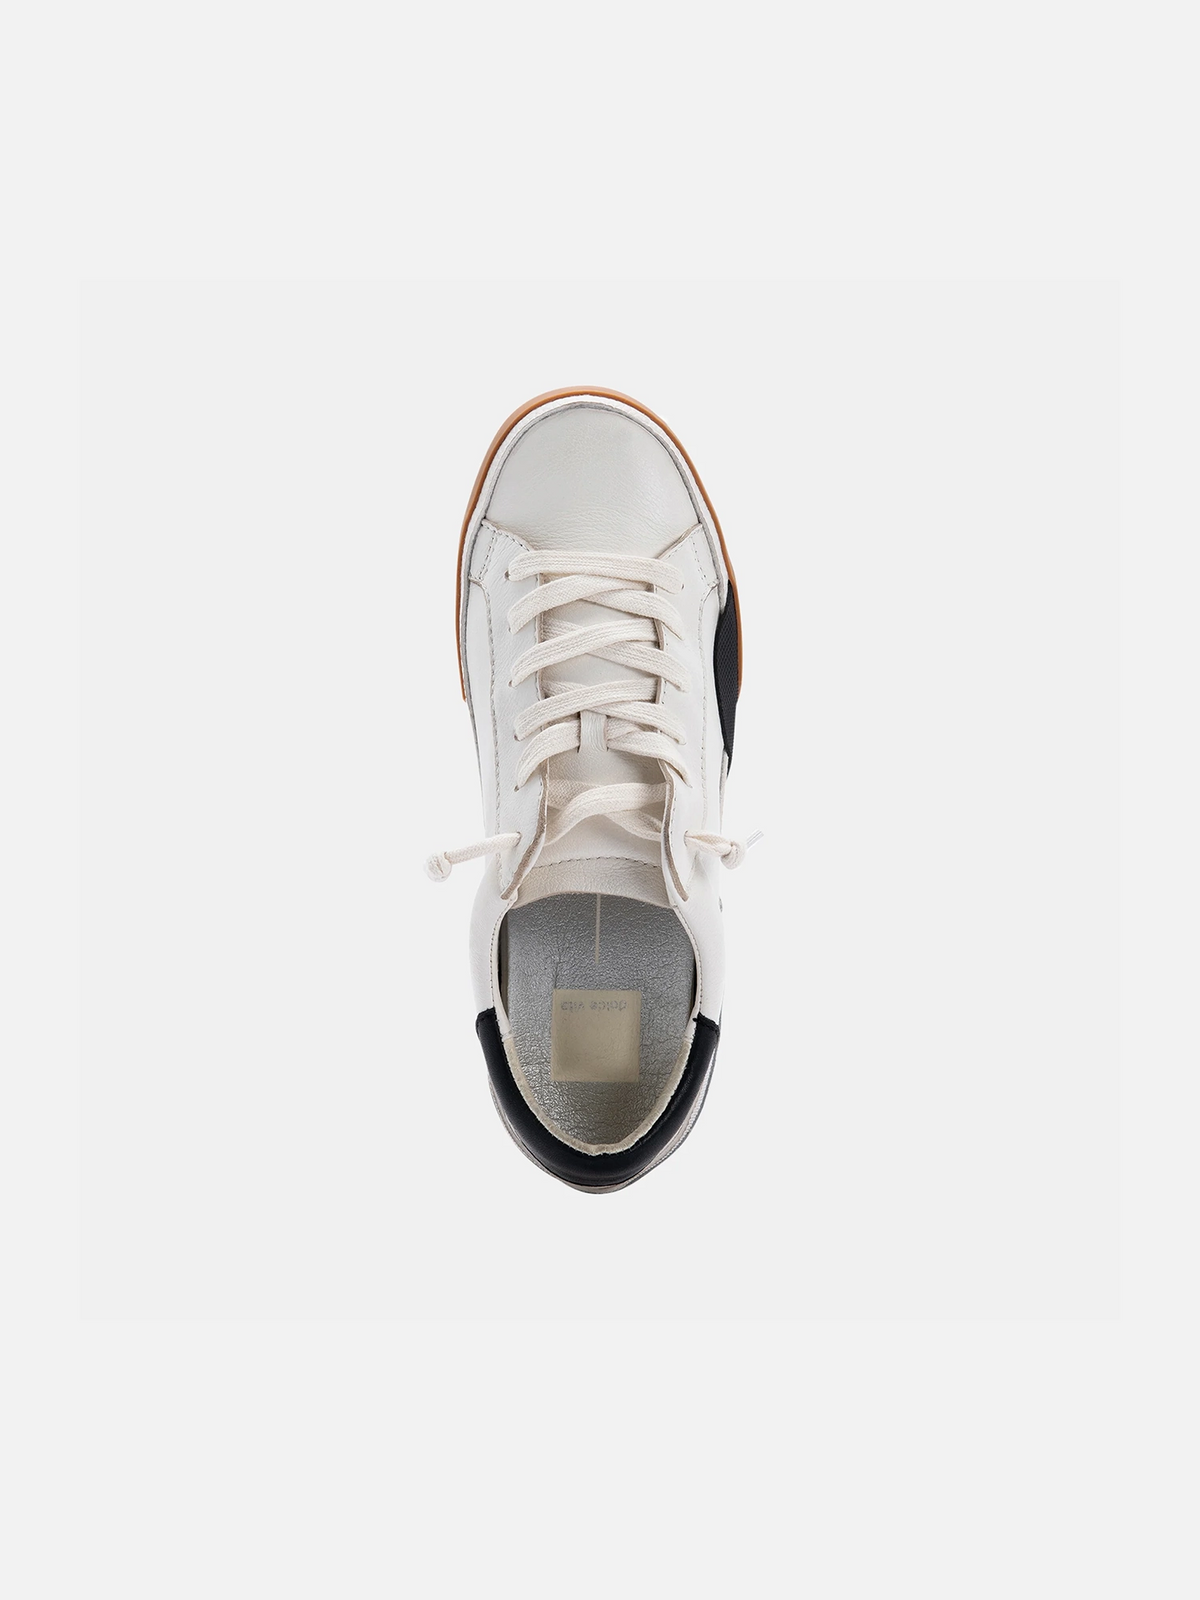 dolce vita zina colorblock sneakers in black and white leather